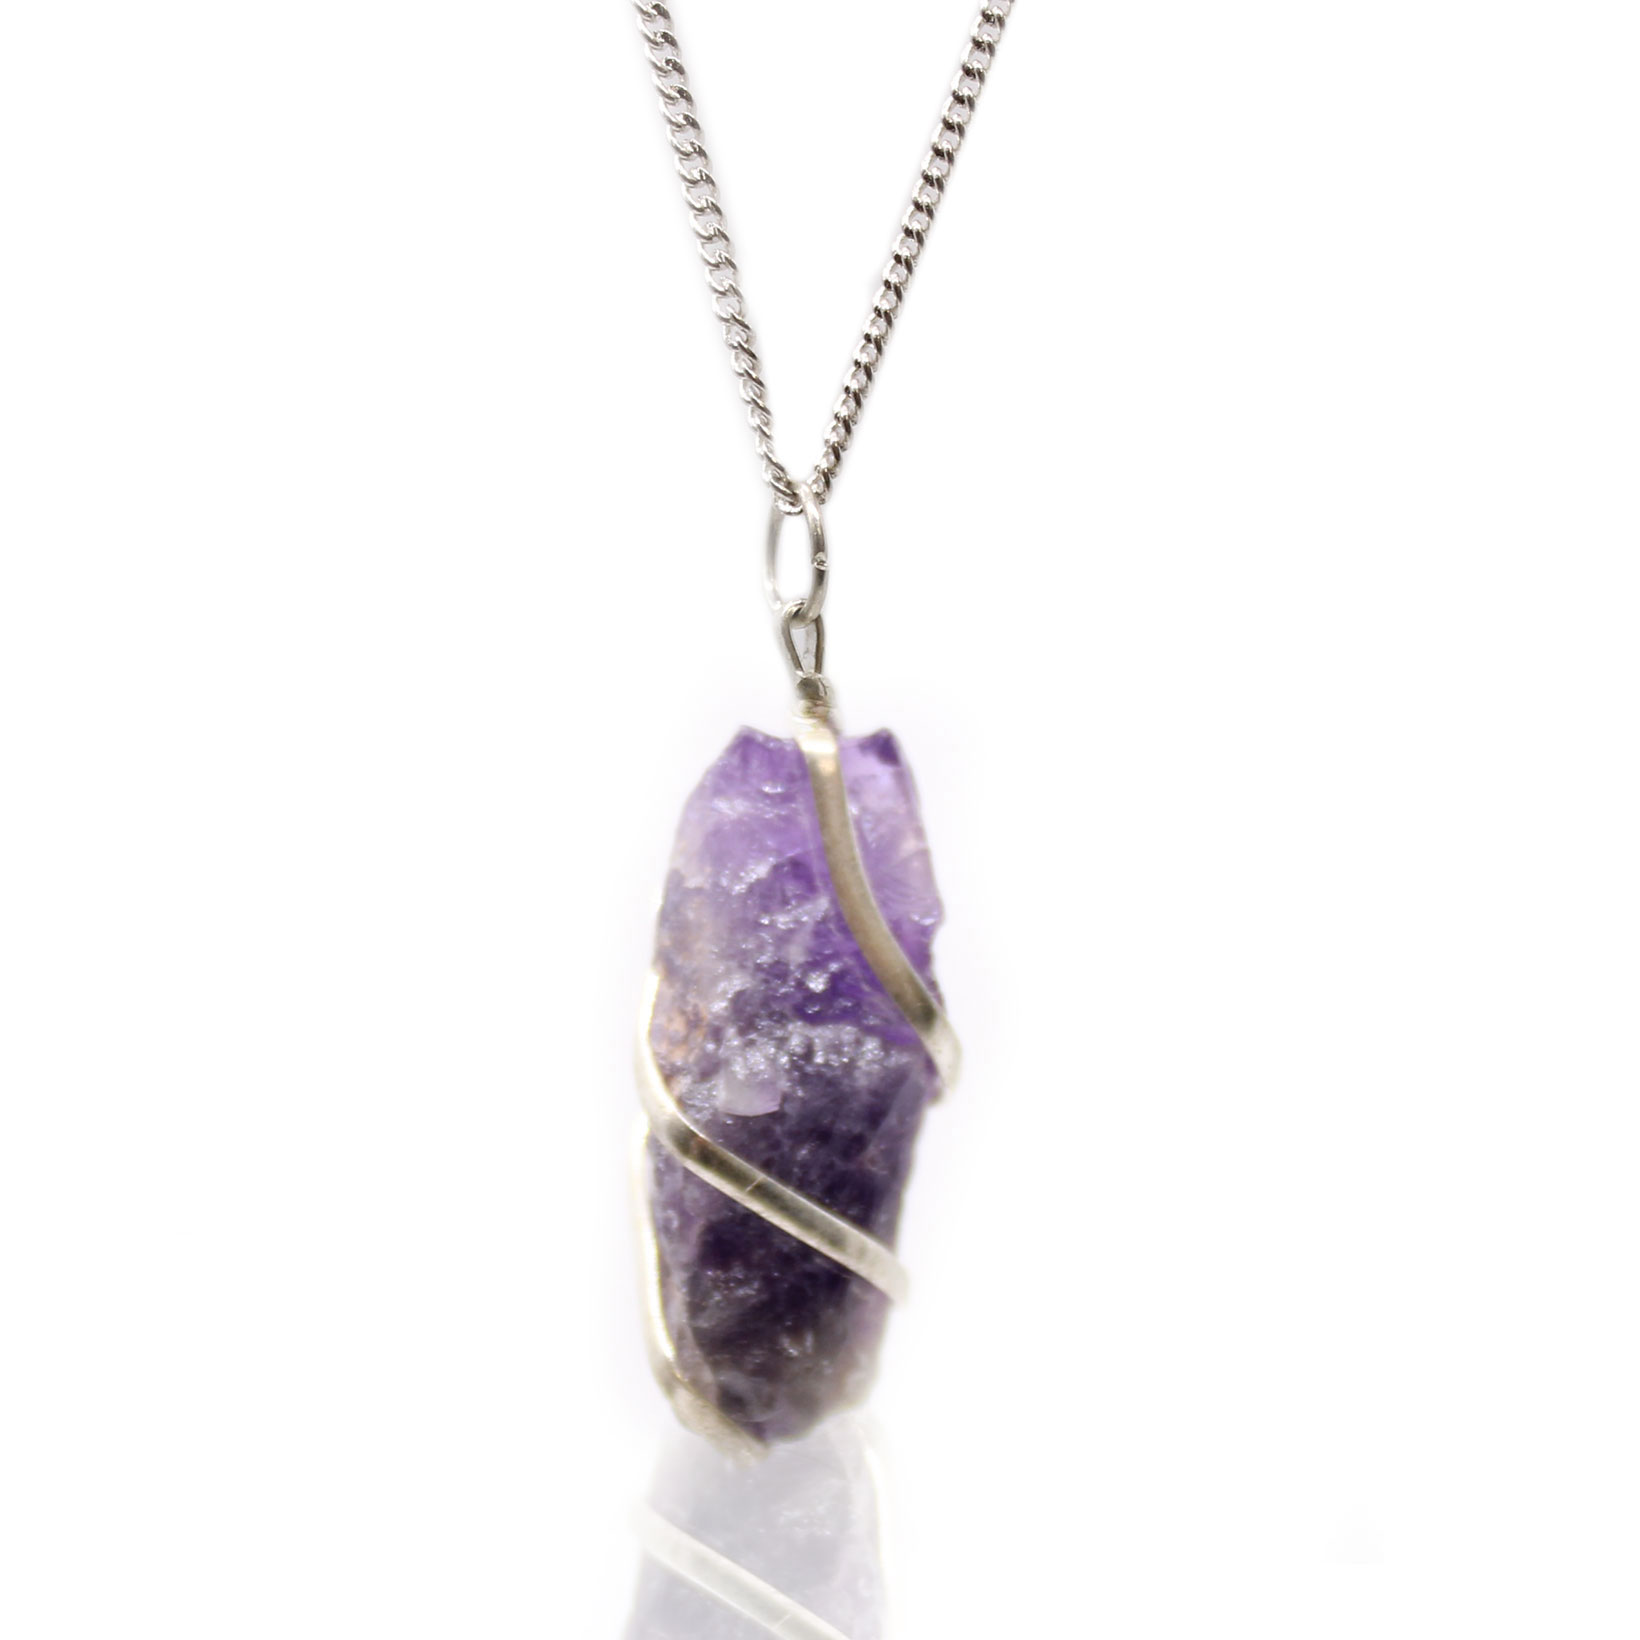 Cascade Wrapped Gemstone Necklace - Rough Amethyst - Click Image to Close